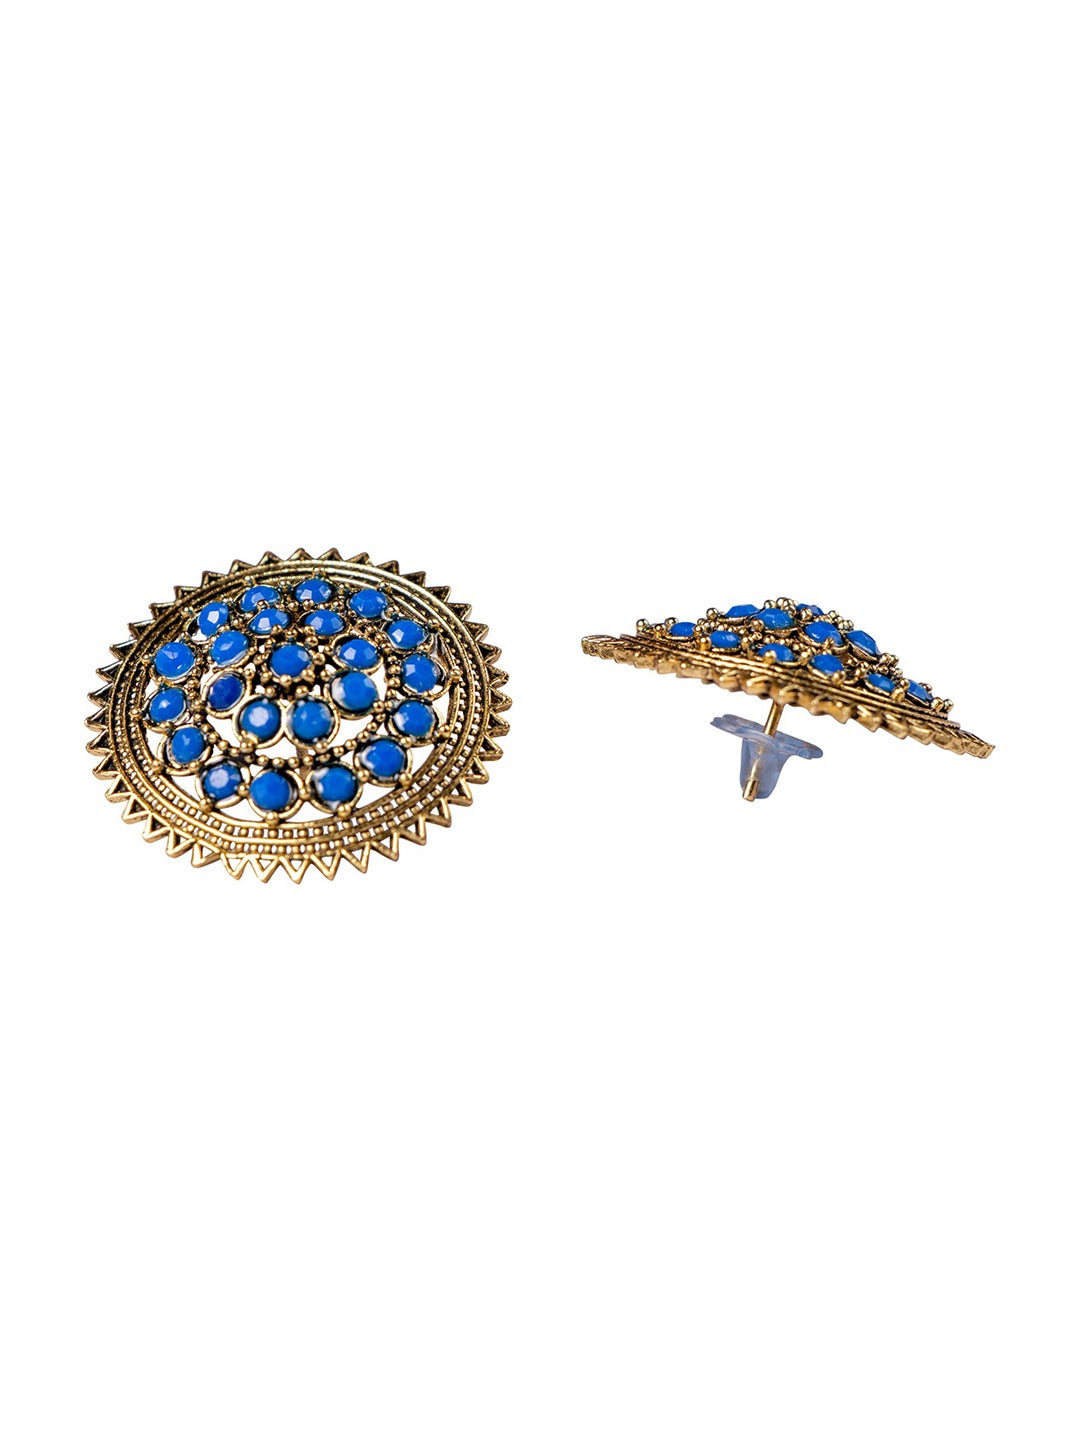 Women's Navy Blue Gold Plated Circular Artificial Beaded Handcrafted Studs Earrings - Morkanth